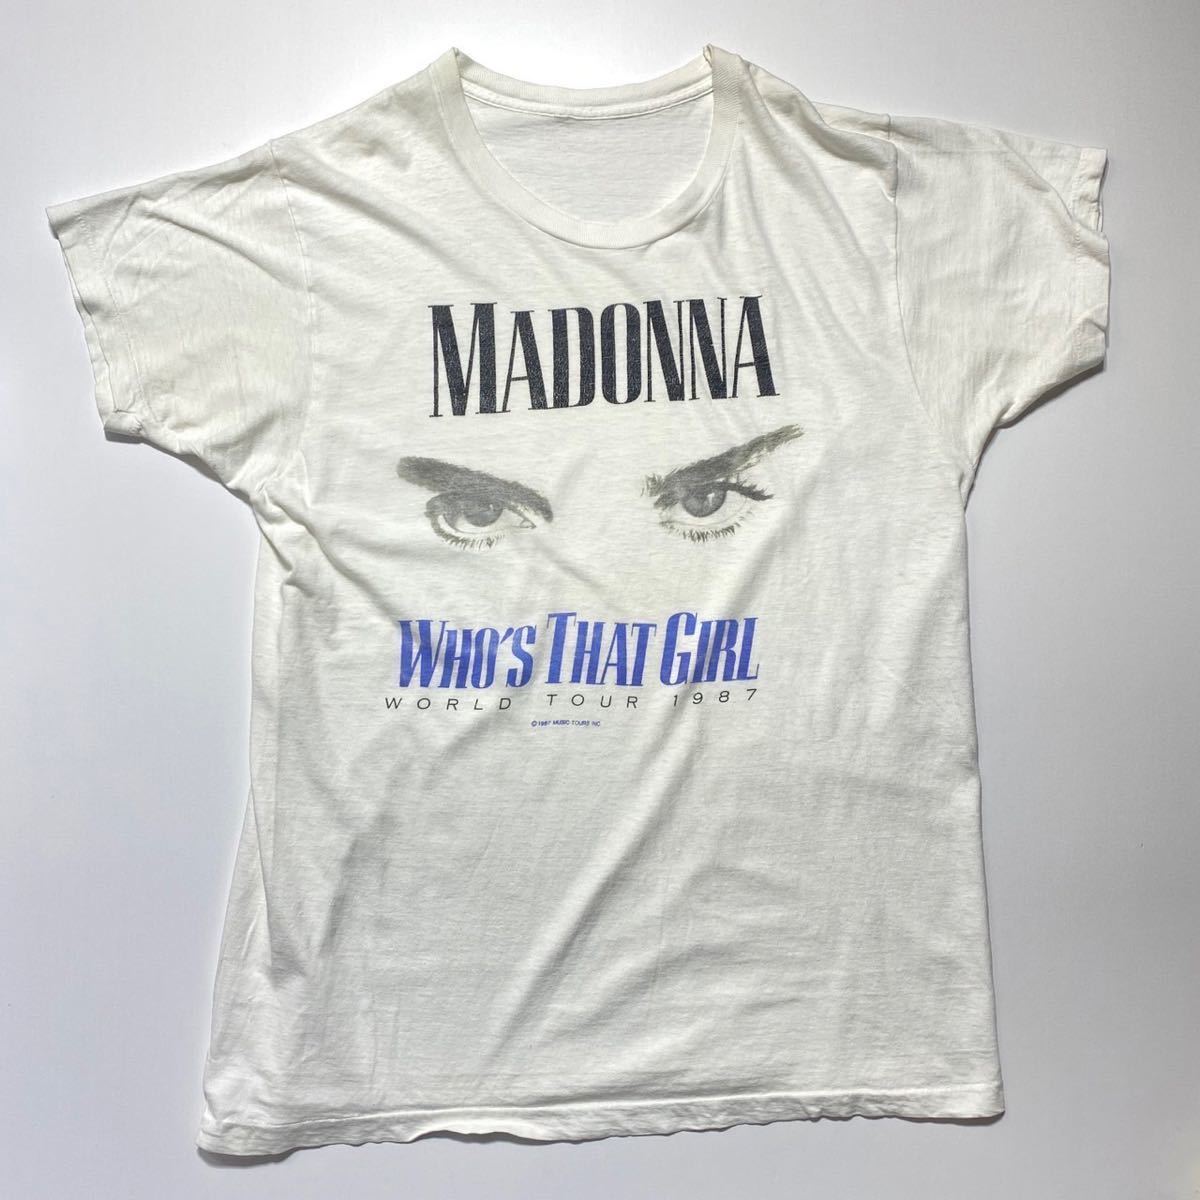 80s Vintage MADONNA WHO'S THAT GIRL World Tour Tee 80年代 ヴィンテージ マドンナ フーズ ザット ガール ワールドツアー Tシャツ G1670